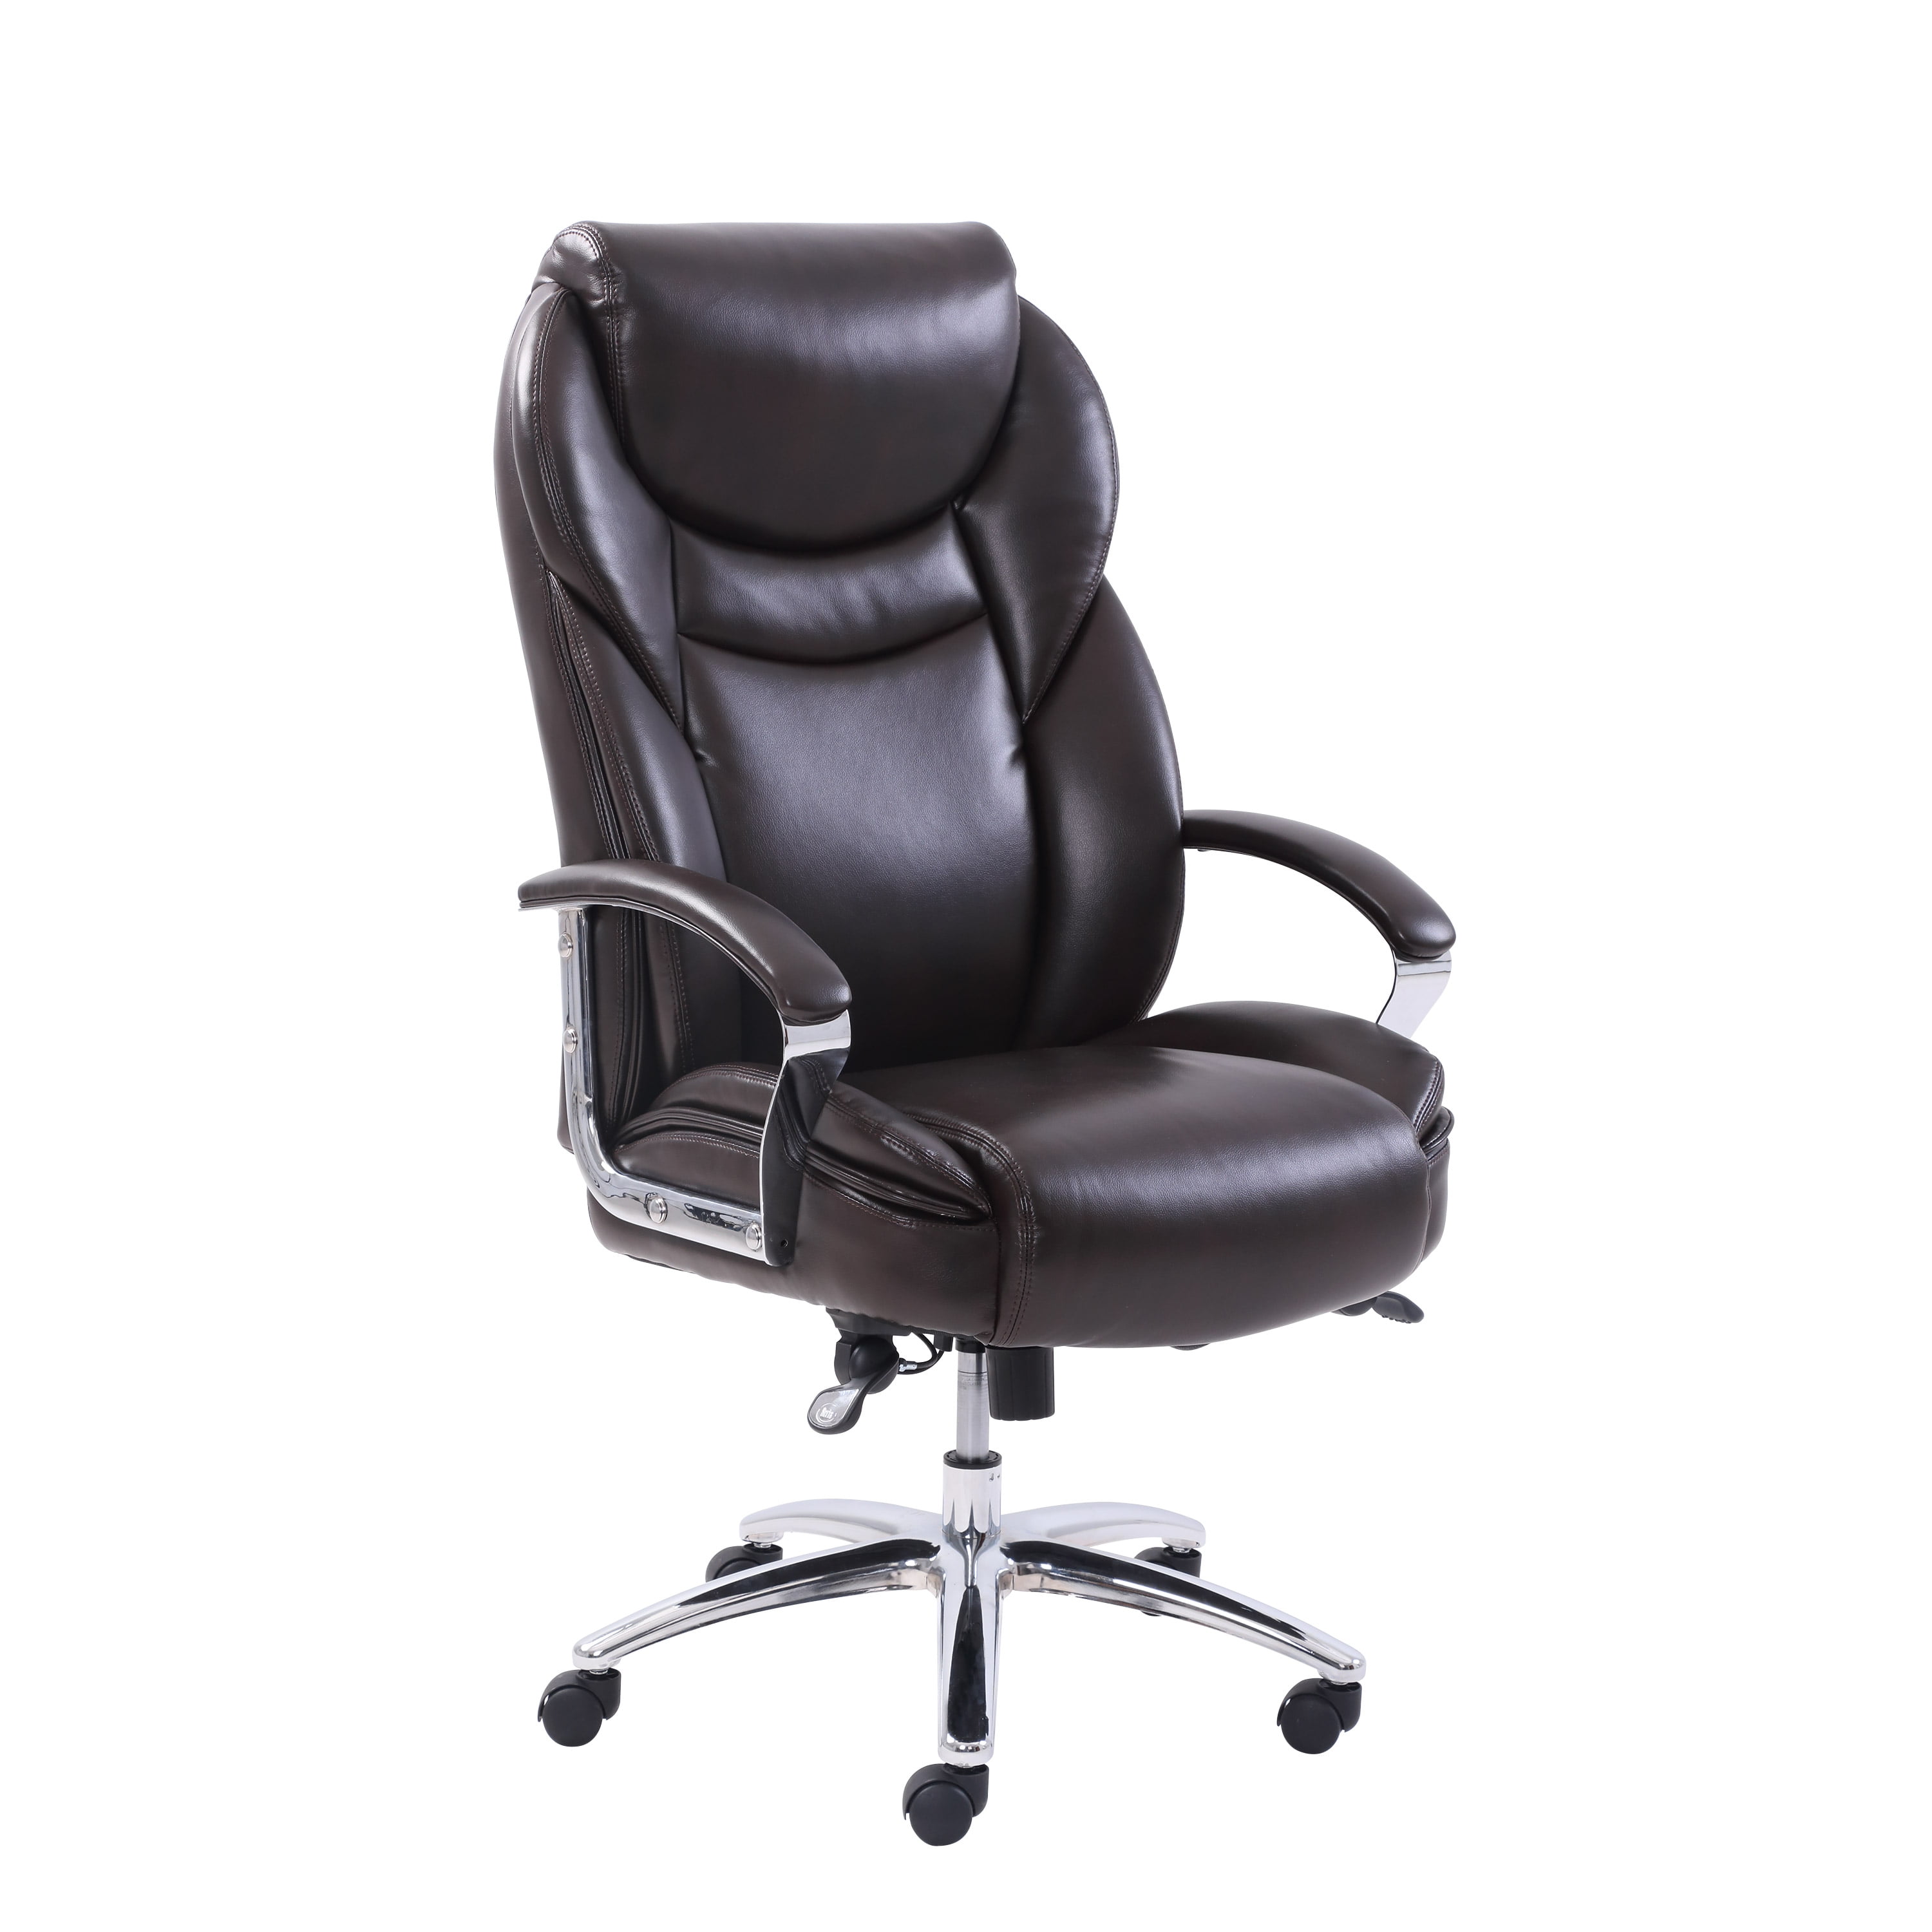 Serta Big Tall Office Chair With, Serta Big And Tall Office Chair Manual